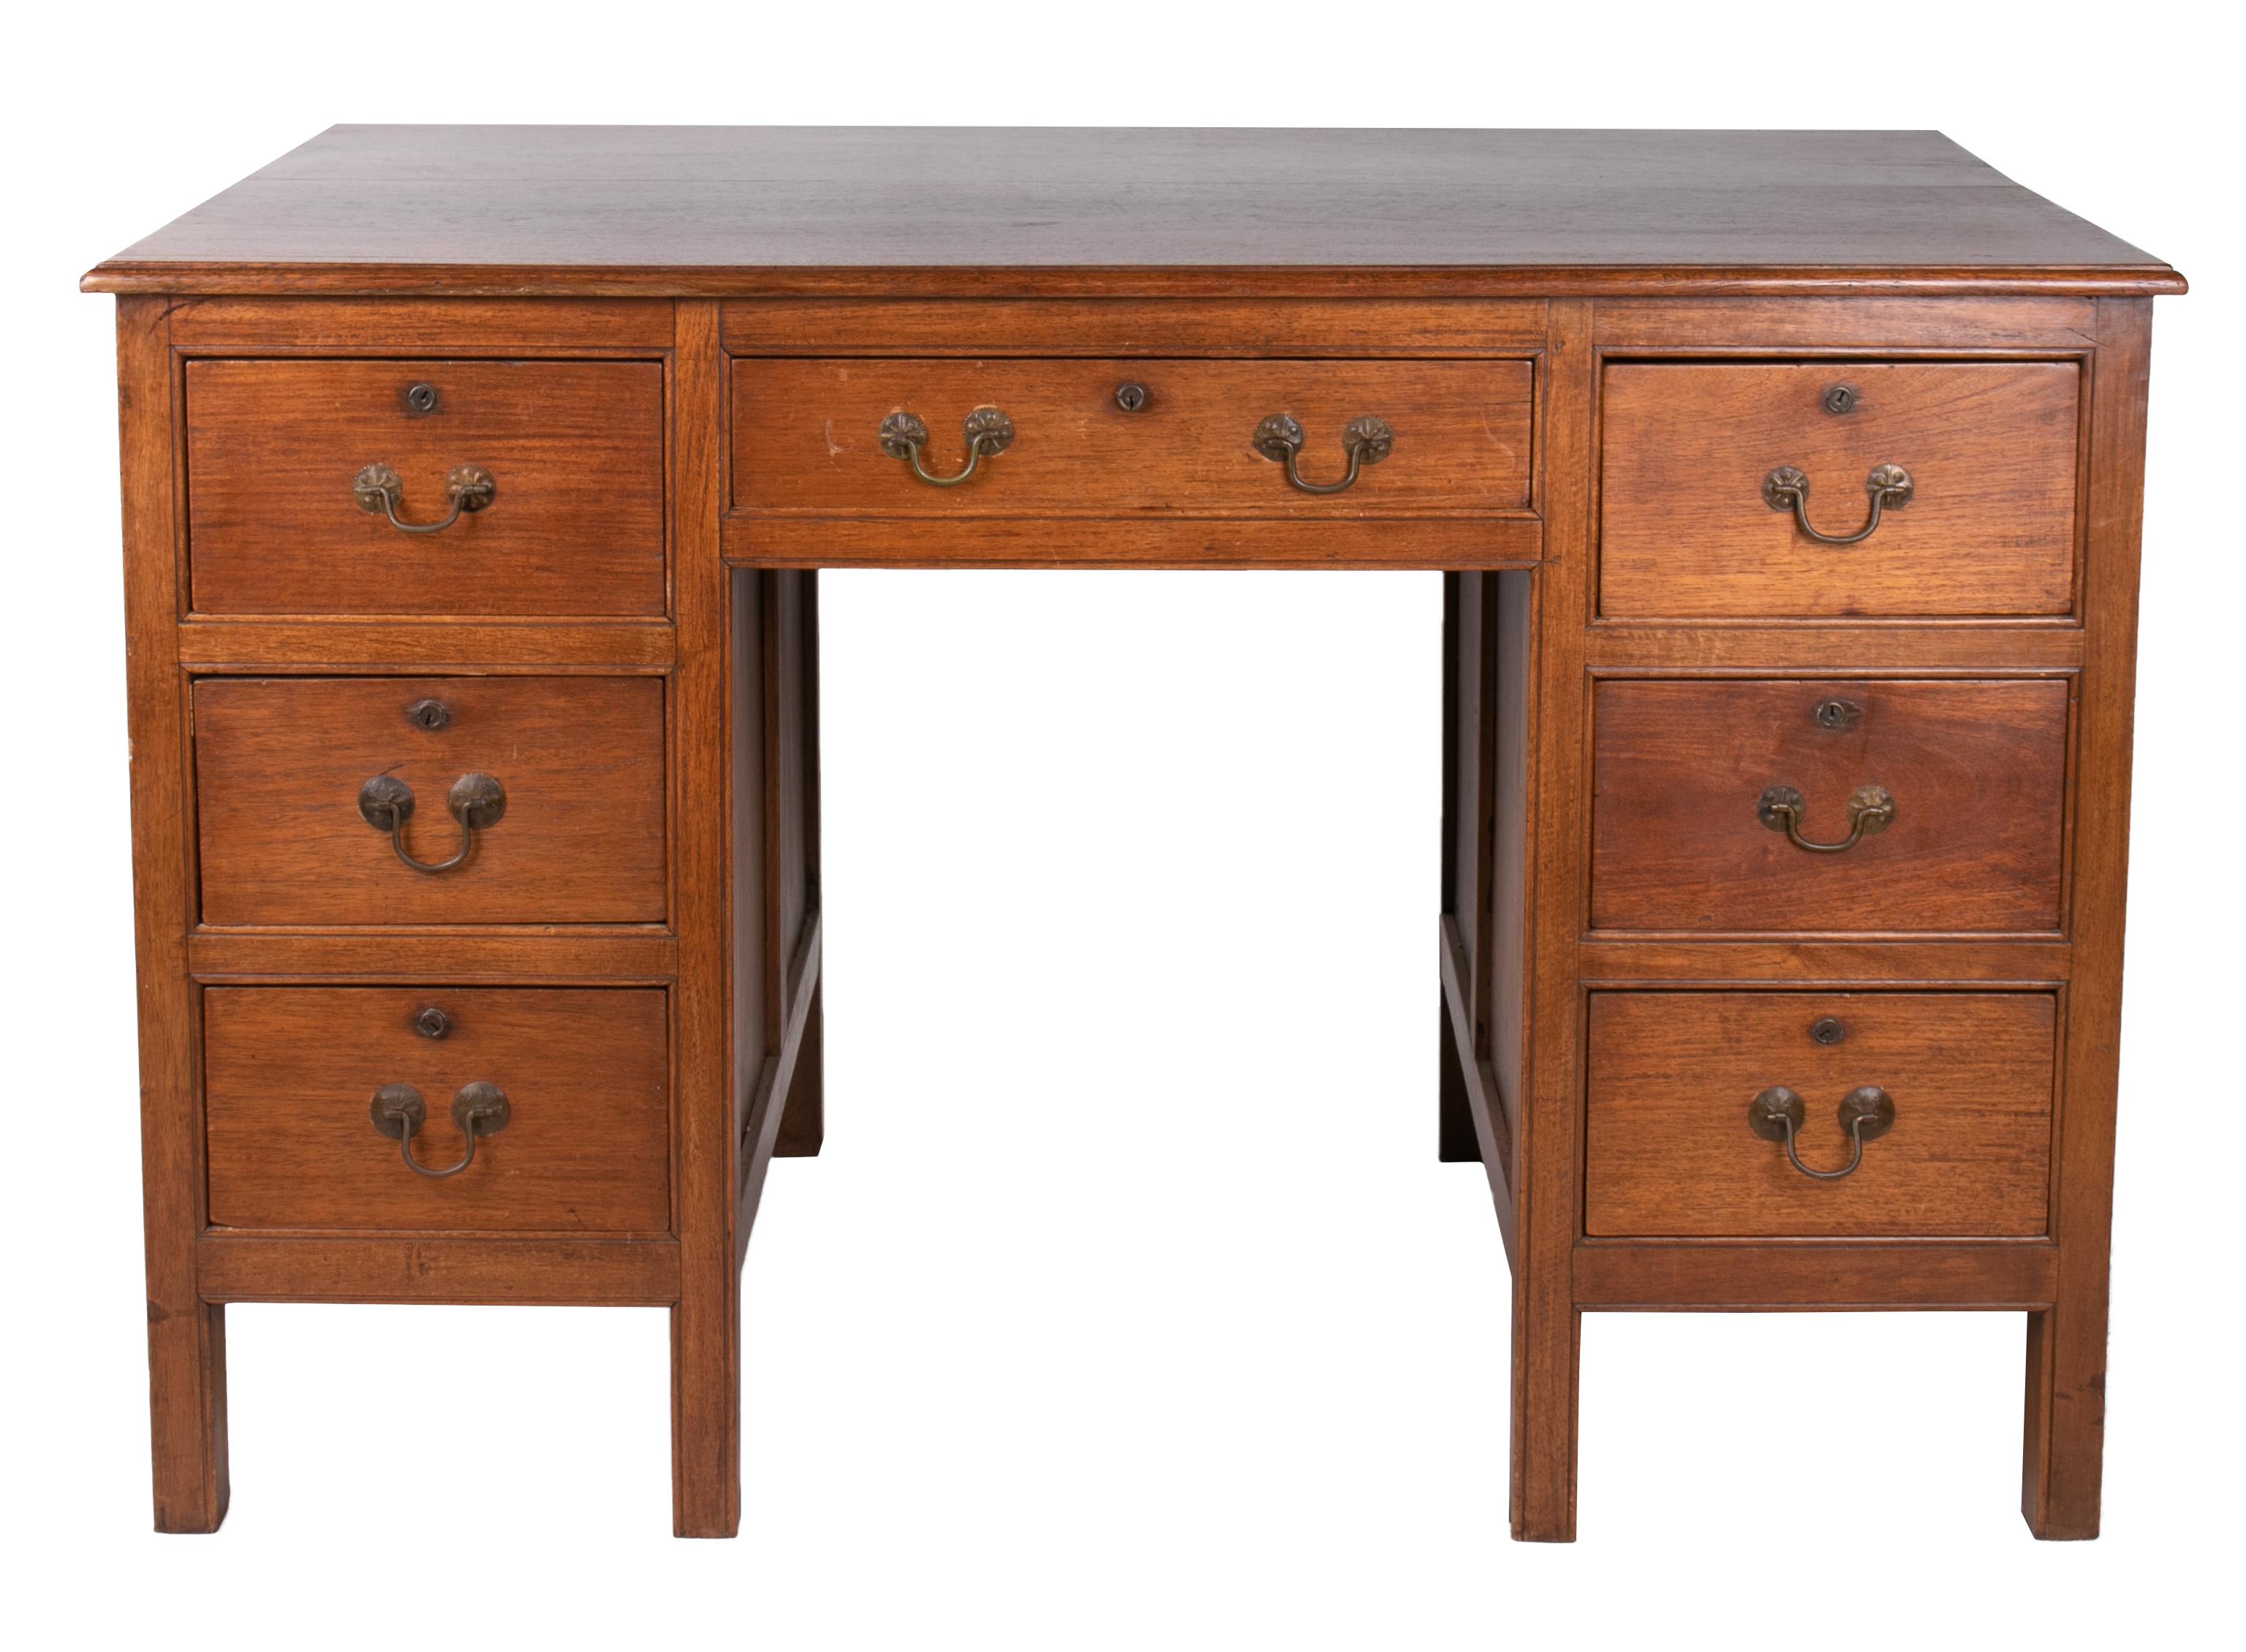 Seven drawer executive desk with brass handles, from Singapore.